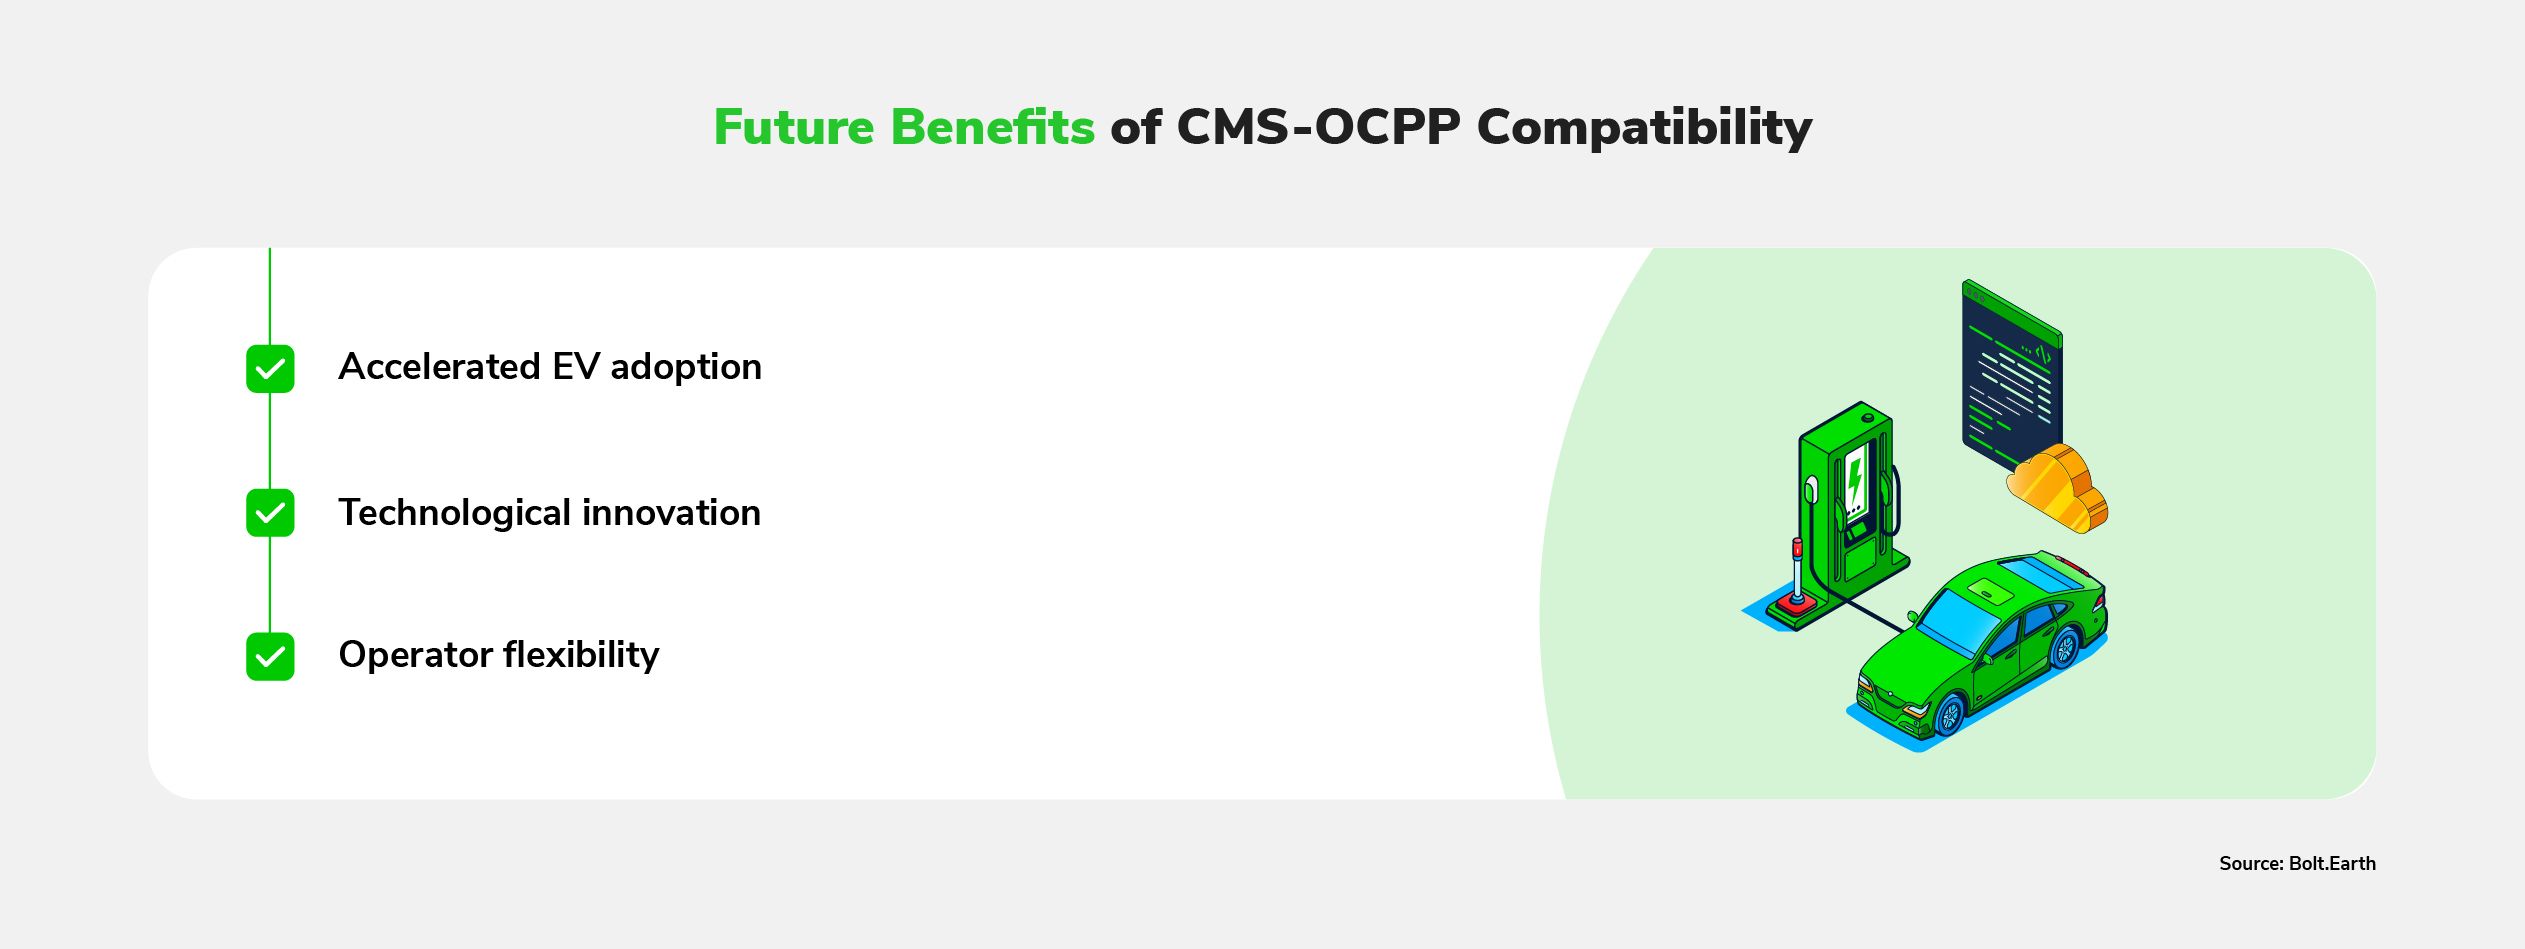 A graphic listing future benefits of CMS-OCPP compatibility